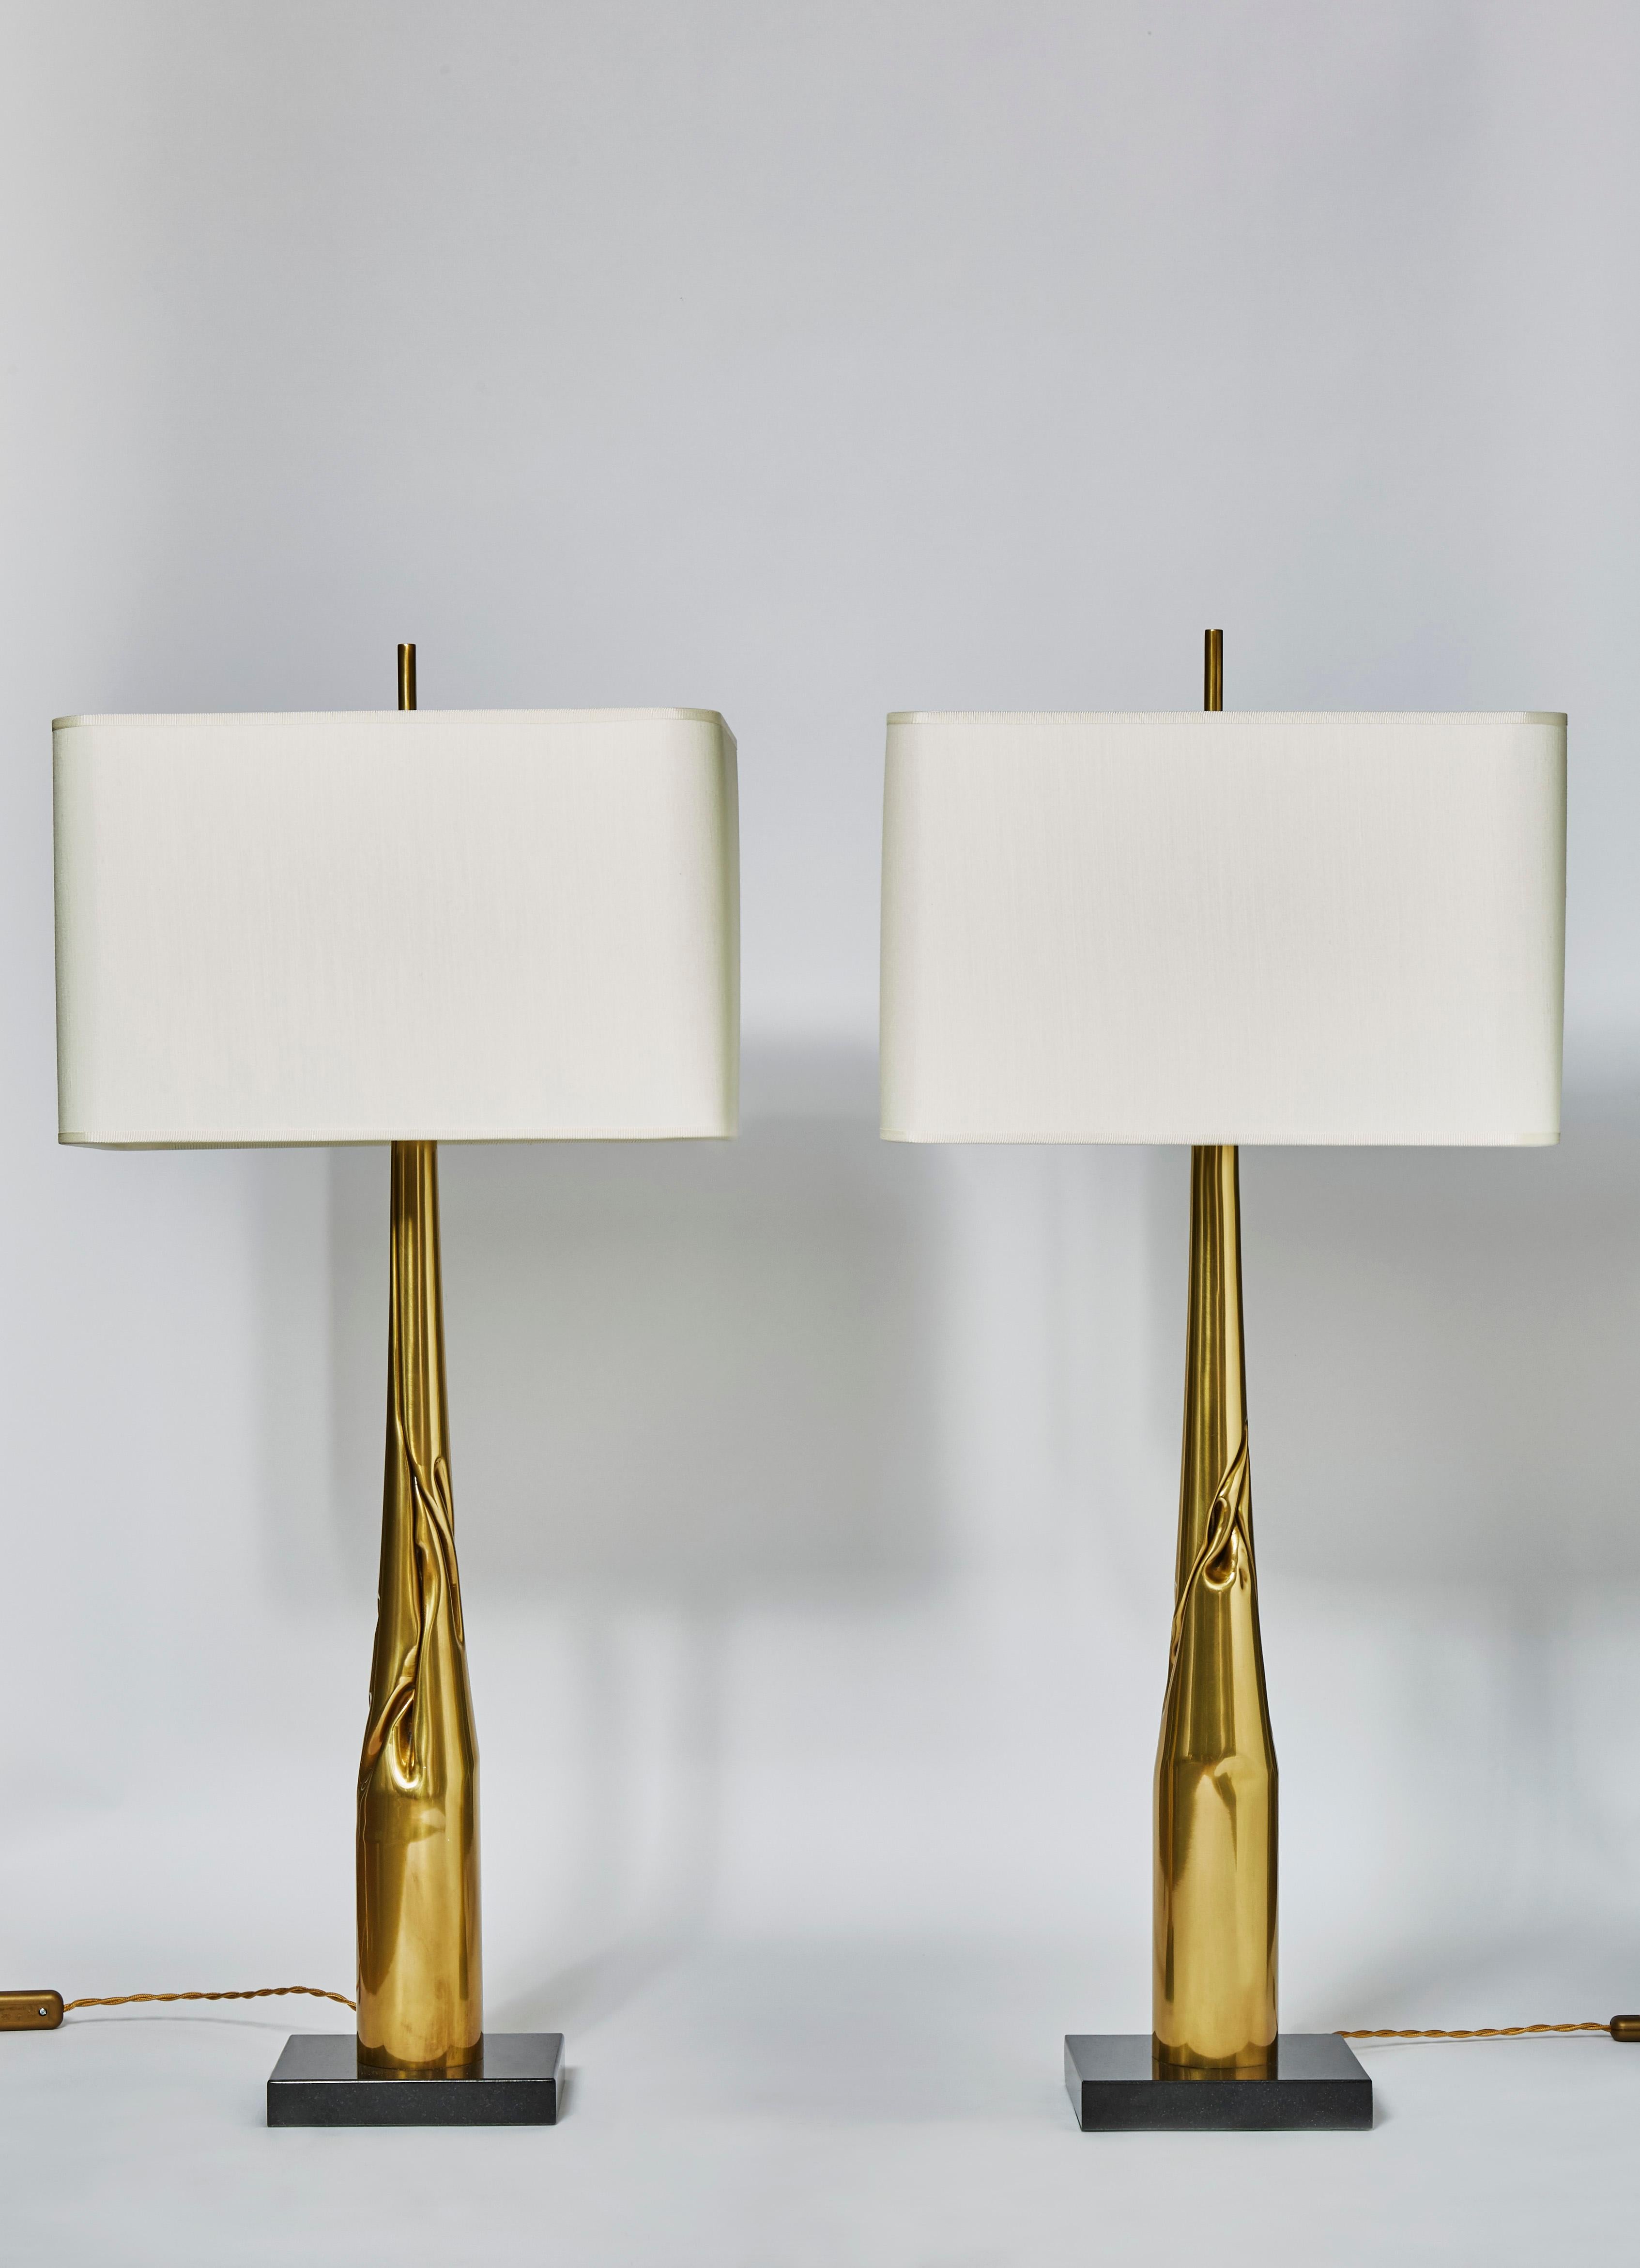 Pair of table lamps made of square black marble bases and twisted and folded brass bodies.

Each lamp is unique, made by the edition house Esperia exclusively for Glustin Luminaires.